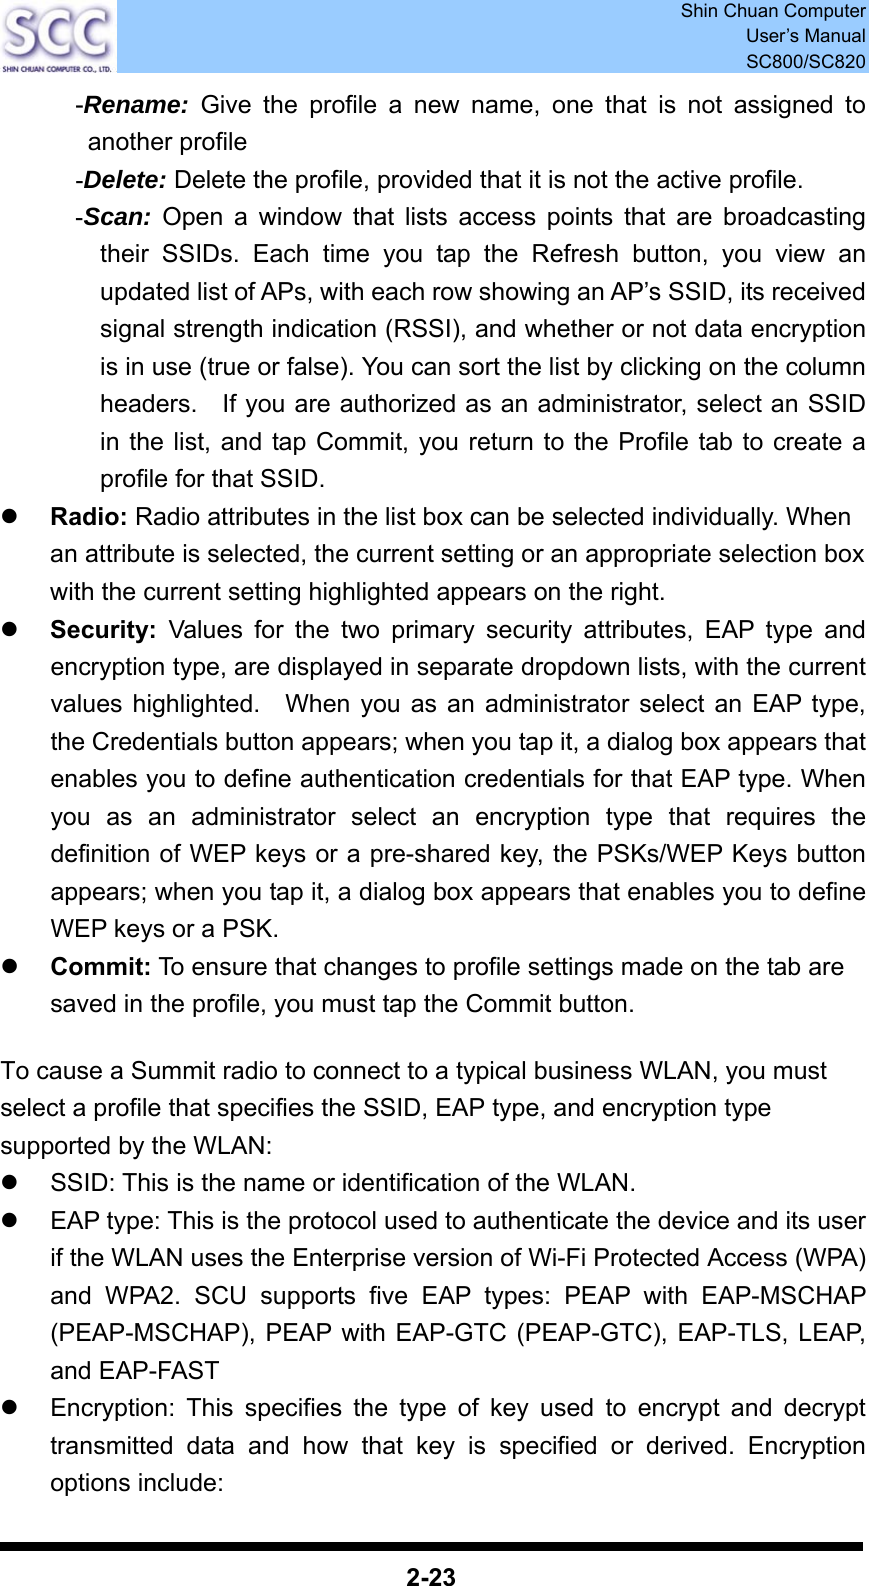  Shin Chuan Computer User’s Manual SC800/SC820  2-23 -Rename: Give the profile a new name, one that is not assigned to another profile -Delete: Delete the profile, provided that it is not the active profile. -Scan: Open a window that lists access points that are broadcasting their SSIDs. Each time you tap the Refresh button, you view an updated list of APs, with each row showing an AP’s SSID, its received signal strength indication (RSSI), and whether or not data encryption is in use (true or false). You can sort the list by clicking on the column headers.    If you are authorized as an administrator, select an SSID in the list, and tap Commit, you return to the Profile tab to create a profile for that SSID. z Radio: Radio attributes in the list box can be selected individually. When an attribute is selected, the current setting or an appropriate selection box with the current setting highlighted appears on the right.   z Security: Values for the two primary security attributes, EAP type and encryption type, are displayed in separate dropdown lists, with the current values highlighted.  When you as an administrator select an EAP type, the Credentials button appears; when you tap it, a dialog box appears that enables you to define authentication credentials for that EAP type. When you as an administrator select an encryption type that requires the definition of WEP keys or a pre-shared key, the PSKs/WEP Keys button appears; when you tap it, a dialog box appears that enables you to define WEP keys or a PSK. z Commit: To ensure that changes to profile settings made on the tab are saved in the profile, you must tap the Commit button.  To cause a Summit radio to connect to a typical business WLAN, you must select a profile that specifies the SSID, EAP type, and encryption type supported by the WLAN: z  SSID: This is the name or identification of the WLAN.   z  EAP type: This is the protocol used to authenticate the device and its user if the WLAN uses the Enterprise version of Wi-Fi Protected Access (WPA) and WPA2. SCU supports five EAP types: PEAP with EAP-MSCHAP (PEAP-MSCHAP), PEAP with EAP-GTC (PEAP-GTC), EAP-TLS, LEAP, and EAP-FAST   z  Encryption: This specifies the type of key used to encrypt and decrypt transmitted data and how that key is specified or derived. Encryption options include: 